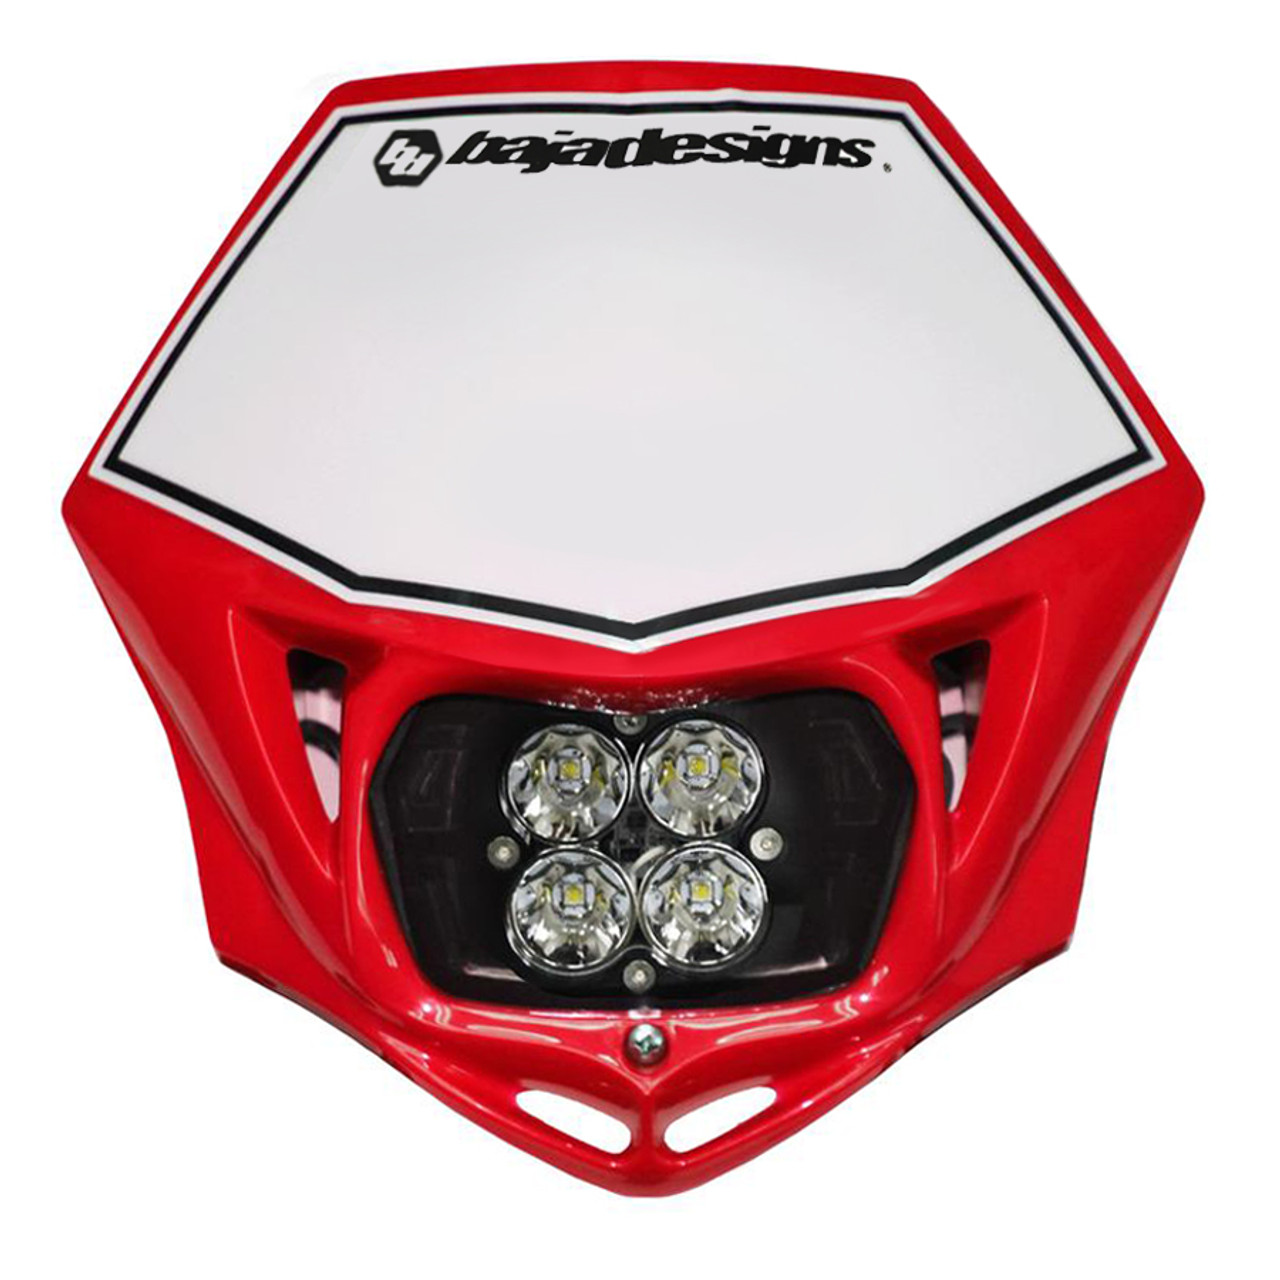 Motorcycle Race Light LED DC Red Squadron Sport Baja Designs